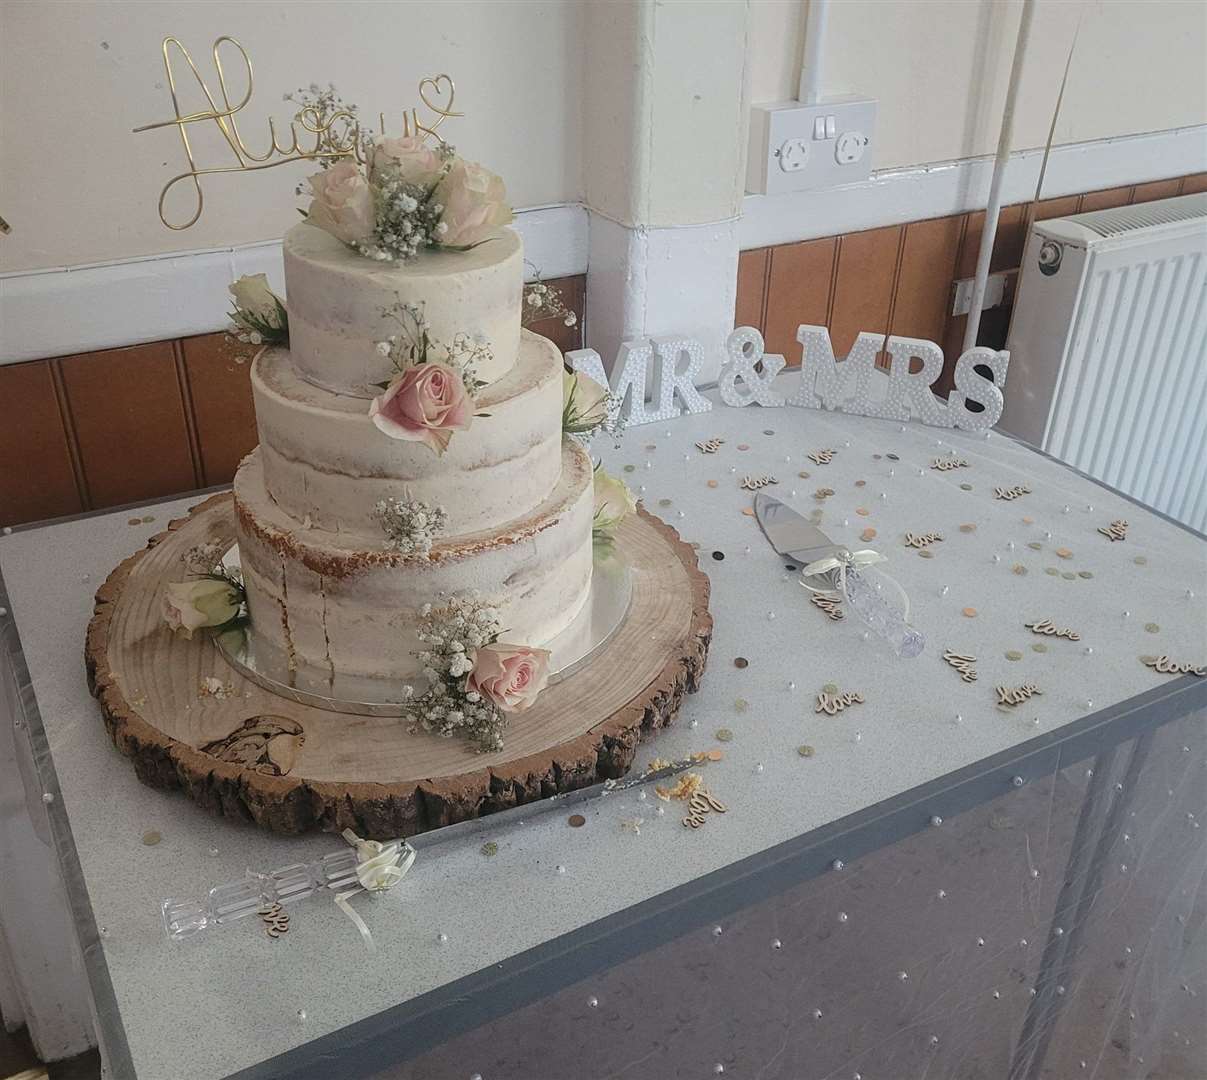 The wedding cake cost £125. Picture: SWNS